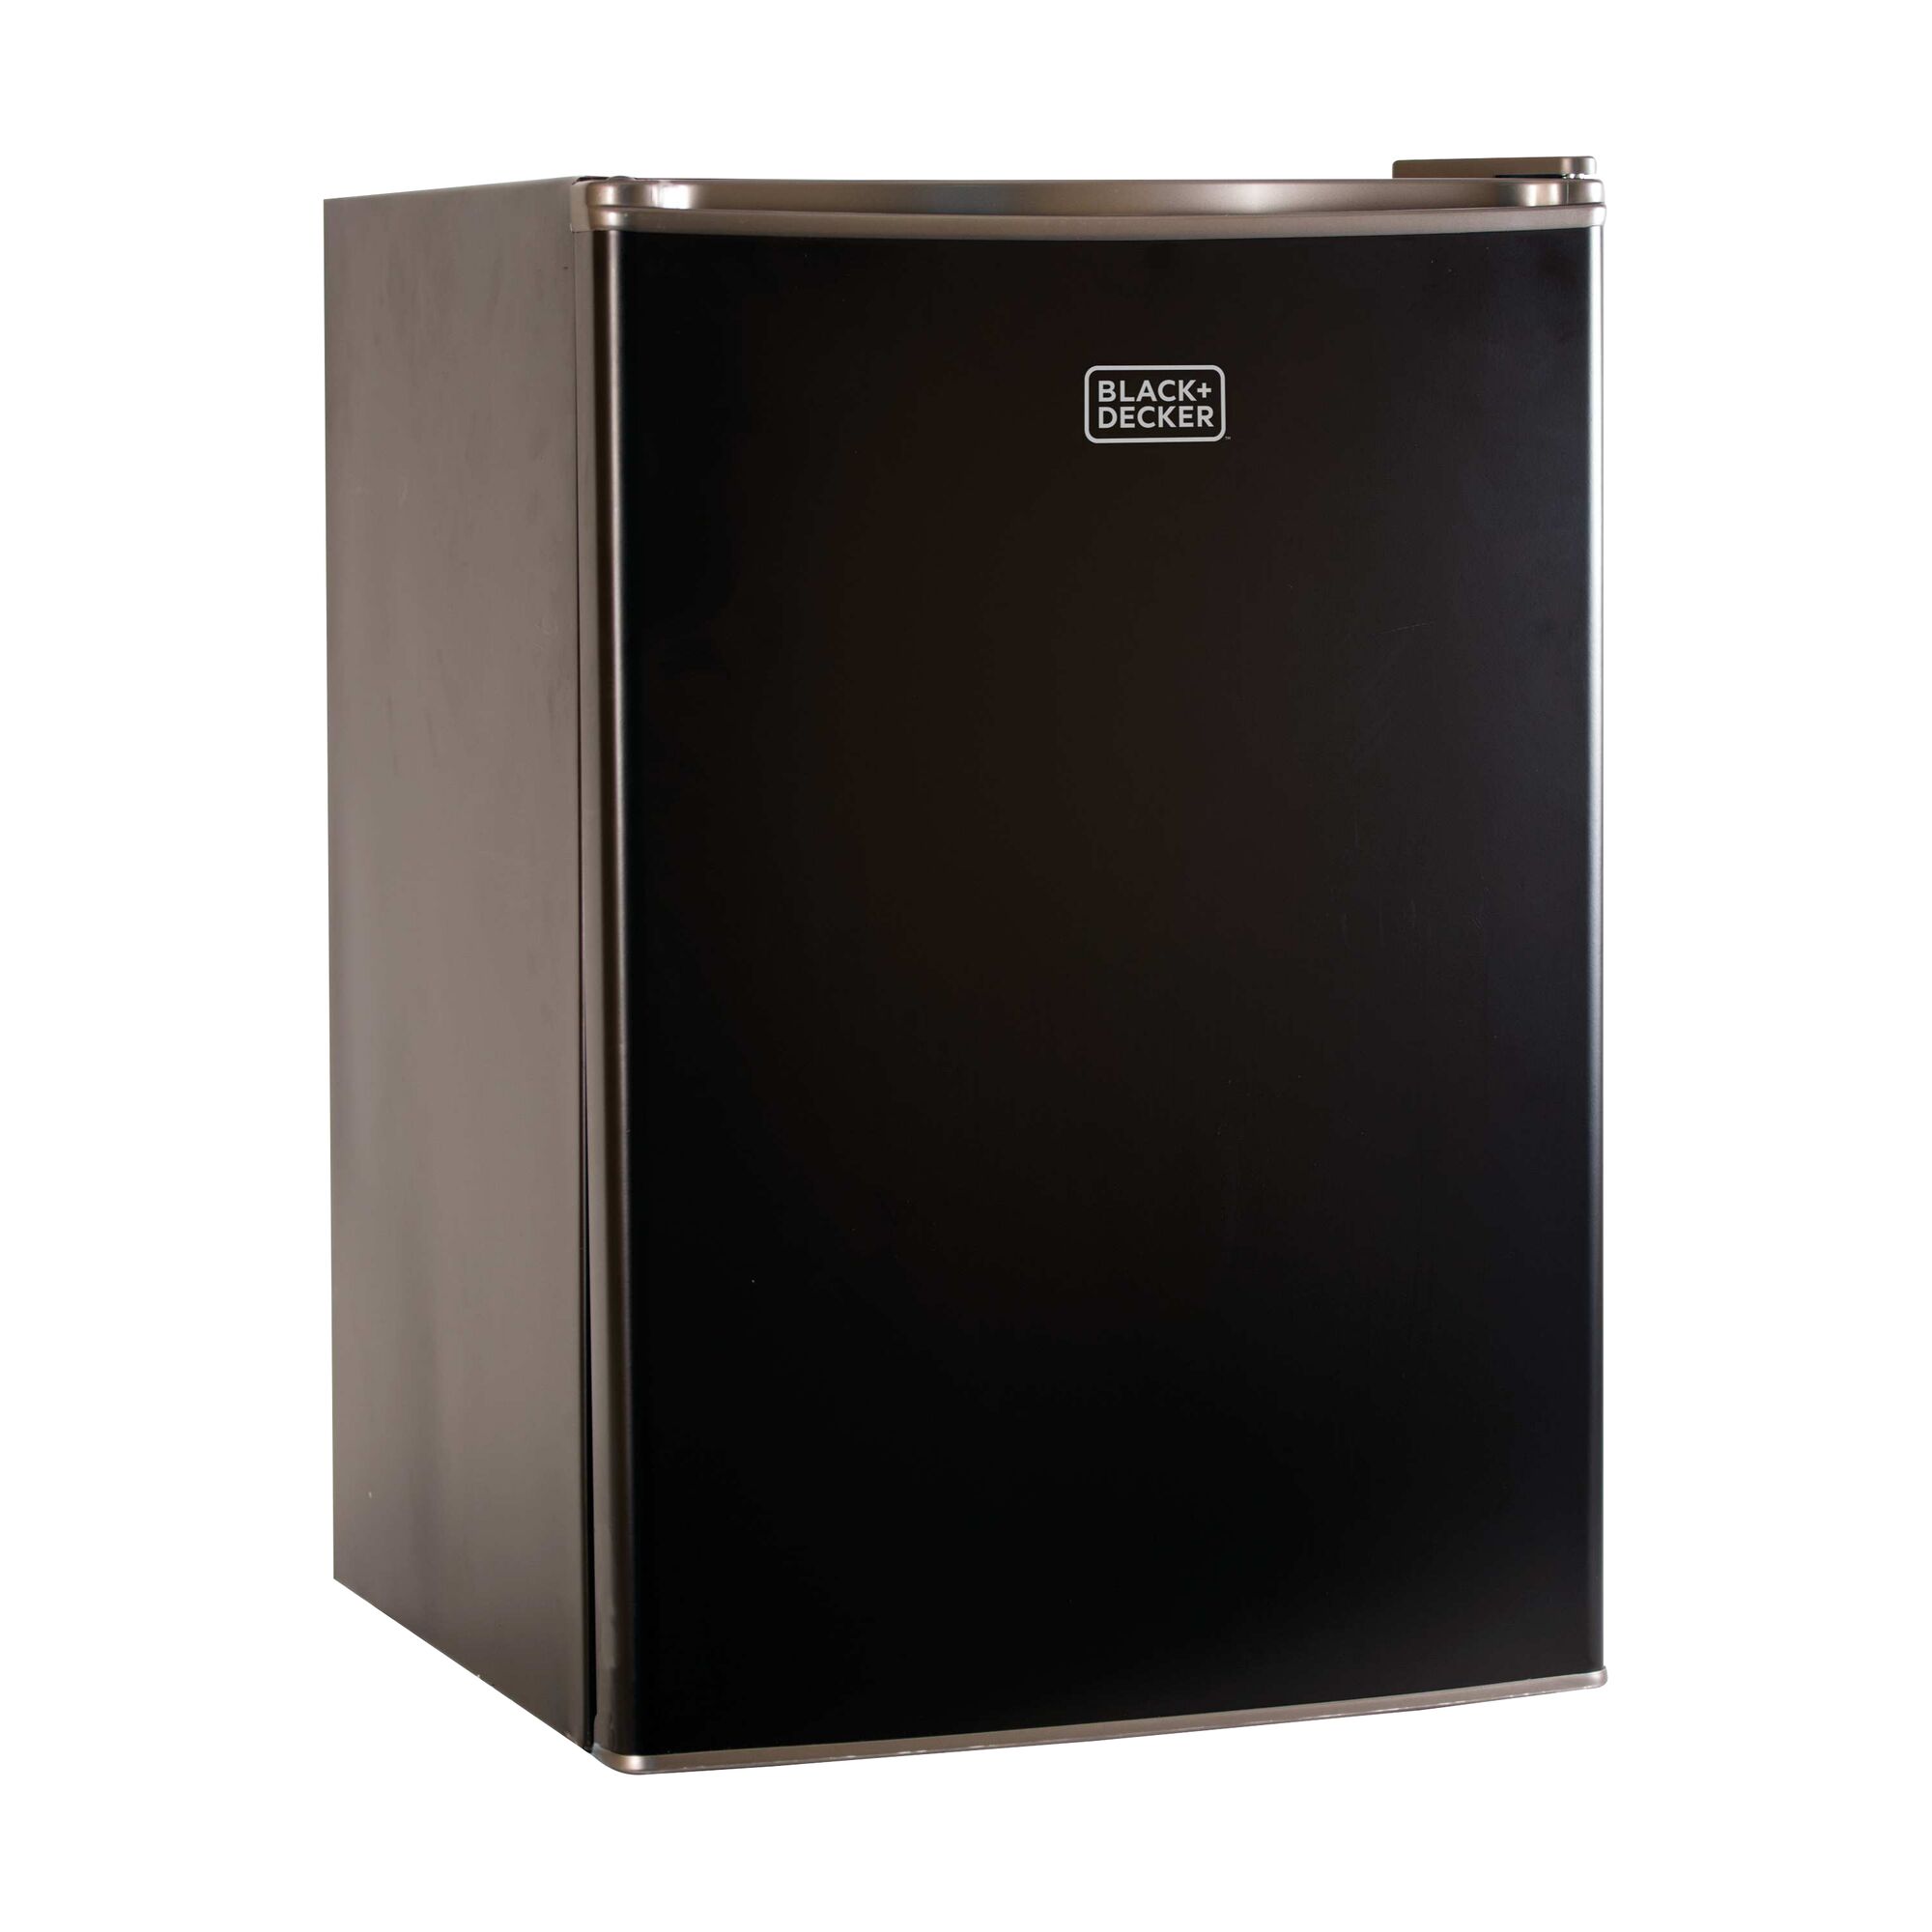 Profile of 2 point 5 cubic feet energy star refrigerator with freezer.